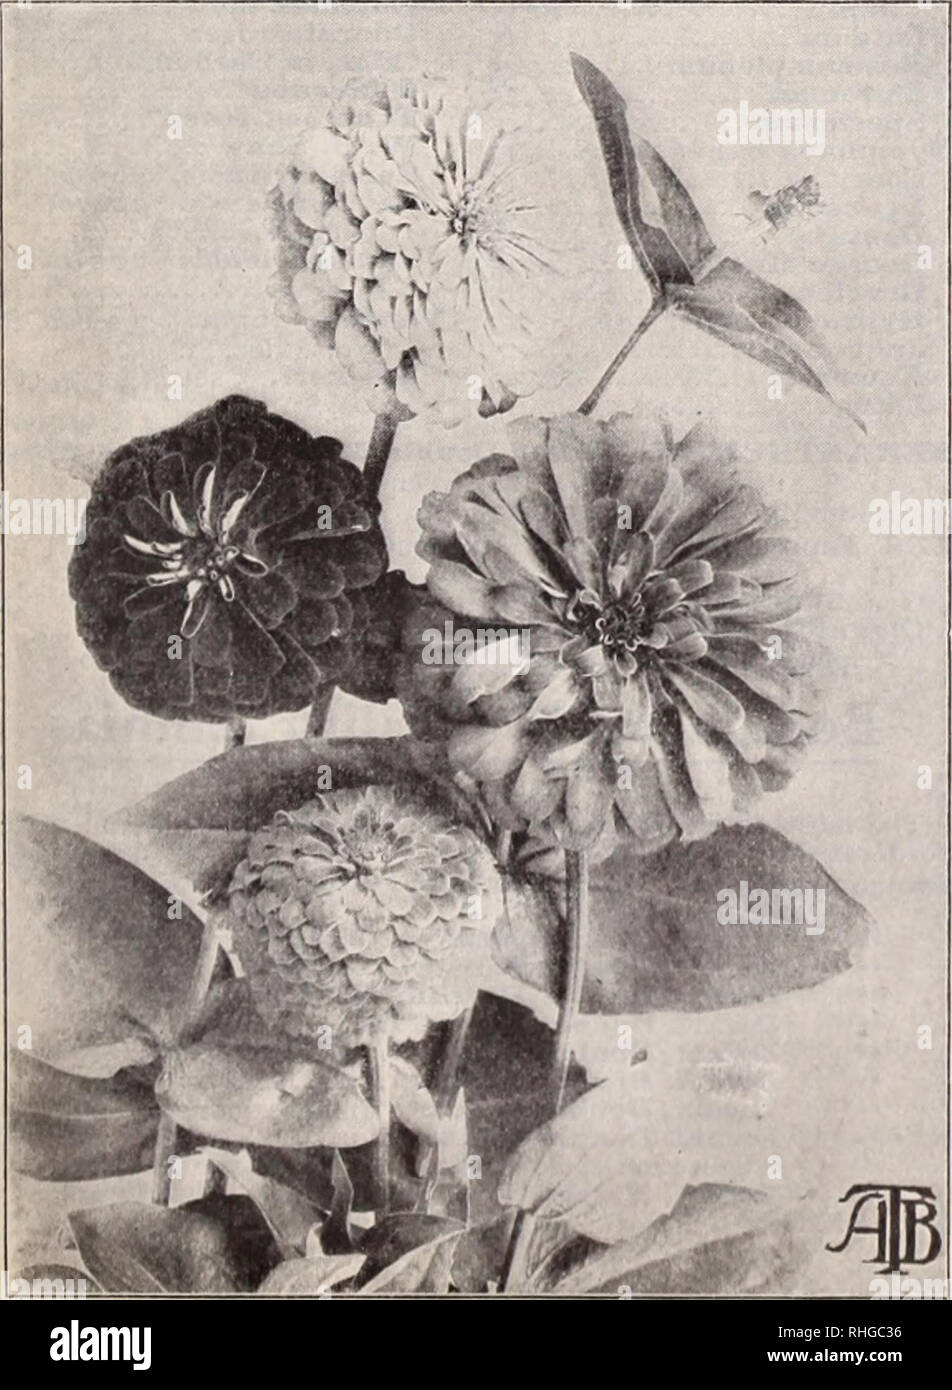 . Boddington's quality bulbs, seeds and plants / Arthur T. Boddington.. Nursery Catalogue. BODDINGTONS 'S)lyUa£ltV SEEDS 43 Trachelium caeruleum (G.S.) A free-growing greeiihousf annual of easy culture, having large cloud-like heads of clear pale mauve flowers somewhat resembling tiypsophila. Height, i8 in. Pkt. 25 cts., 5 pkts. for gi. TRITOMA (Red-Hot-Poker; Flame Flower). HP. 4 ft. Pkt. New sorts, mixed. Suminer $0 25 TROLLIUS (Globe Flower). H.P. 2 ft. Summer. Caucasicus (CJolden Globe). Yellow 10 Japonicus fl. pi. Double yellow isoz., $1.25.. 25 New Hybrids. Mi.xed 25 TOBACCO, see Nieotia Stock Photo